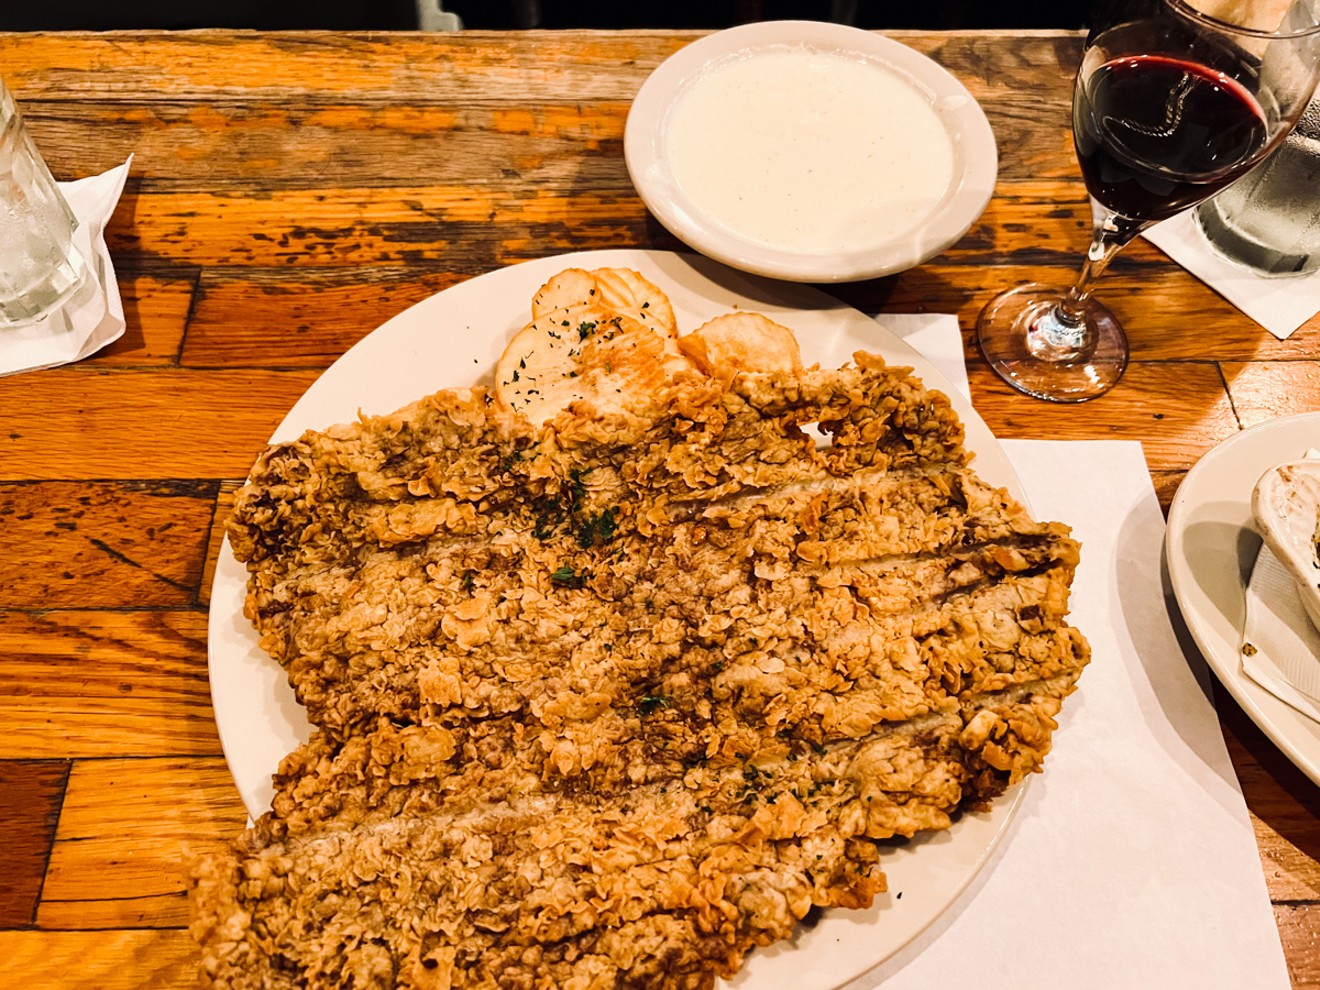 Don't you hate it when your chicken fried steak is so big that it overflows both your plate and your photo?